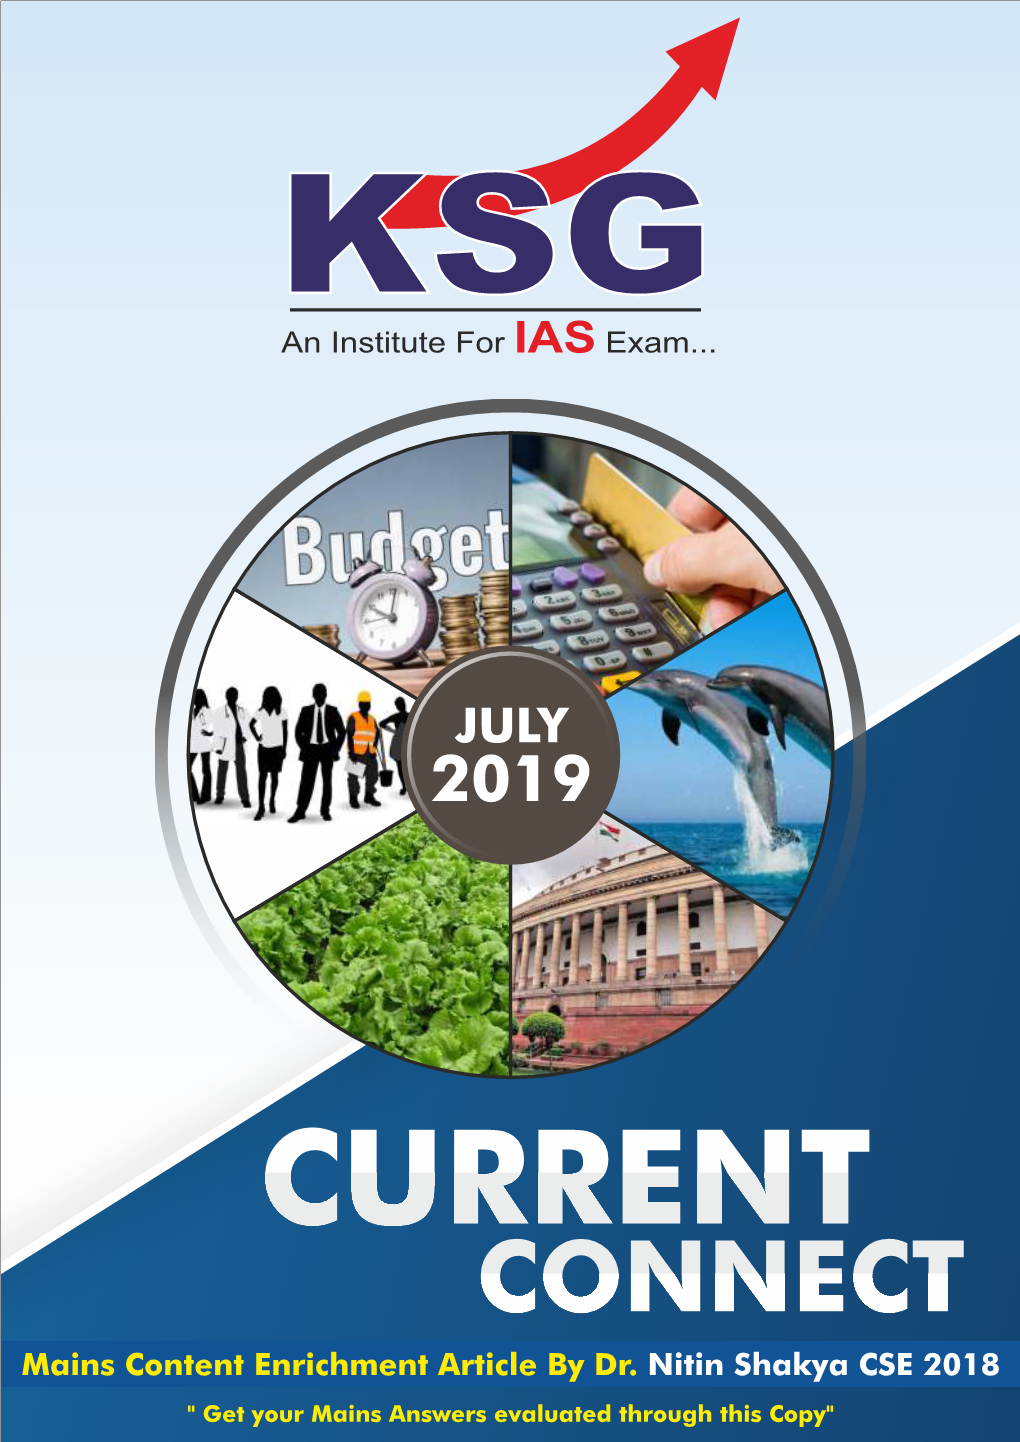 July 2019, Current Connect, KSG